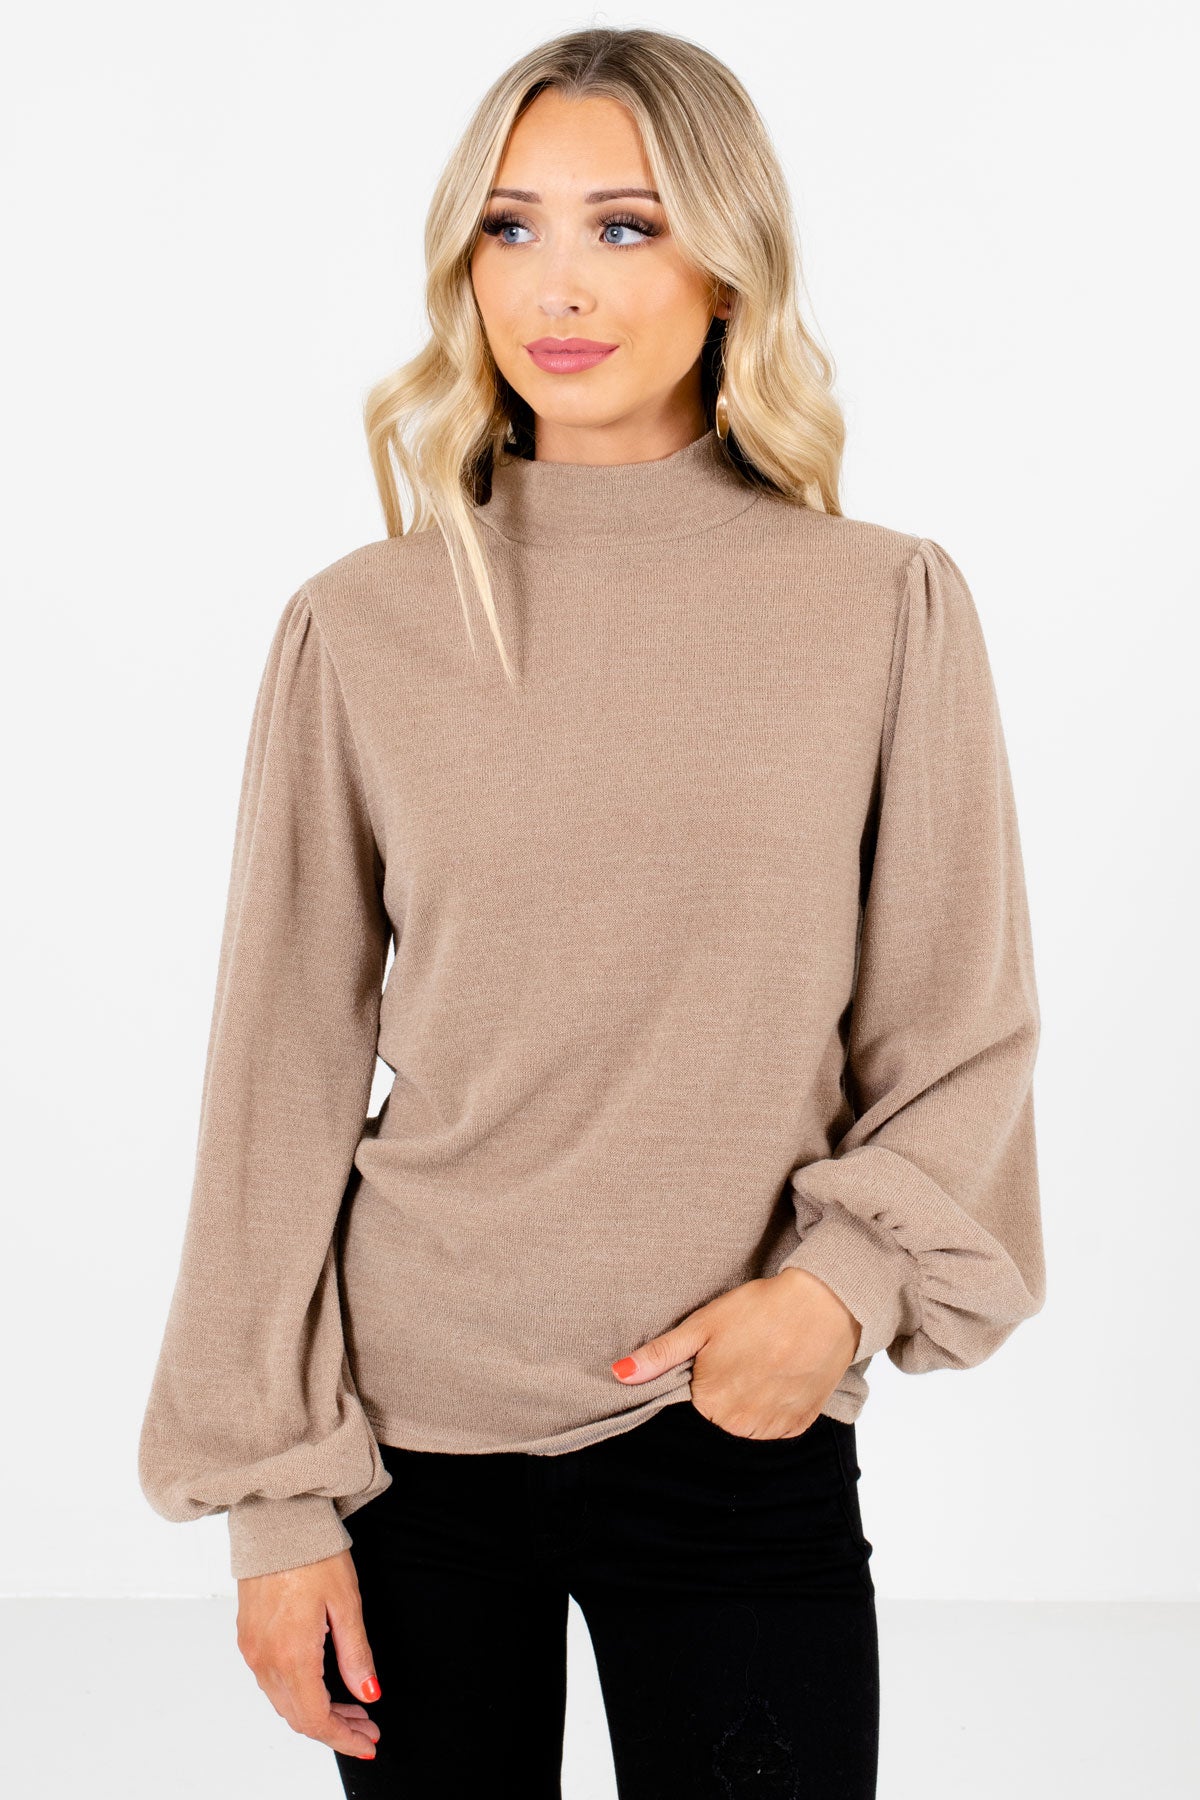 Taupe Brown Mock Neckline Boutique Tops for Women